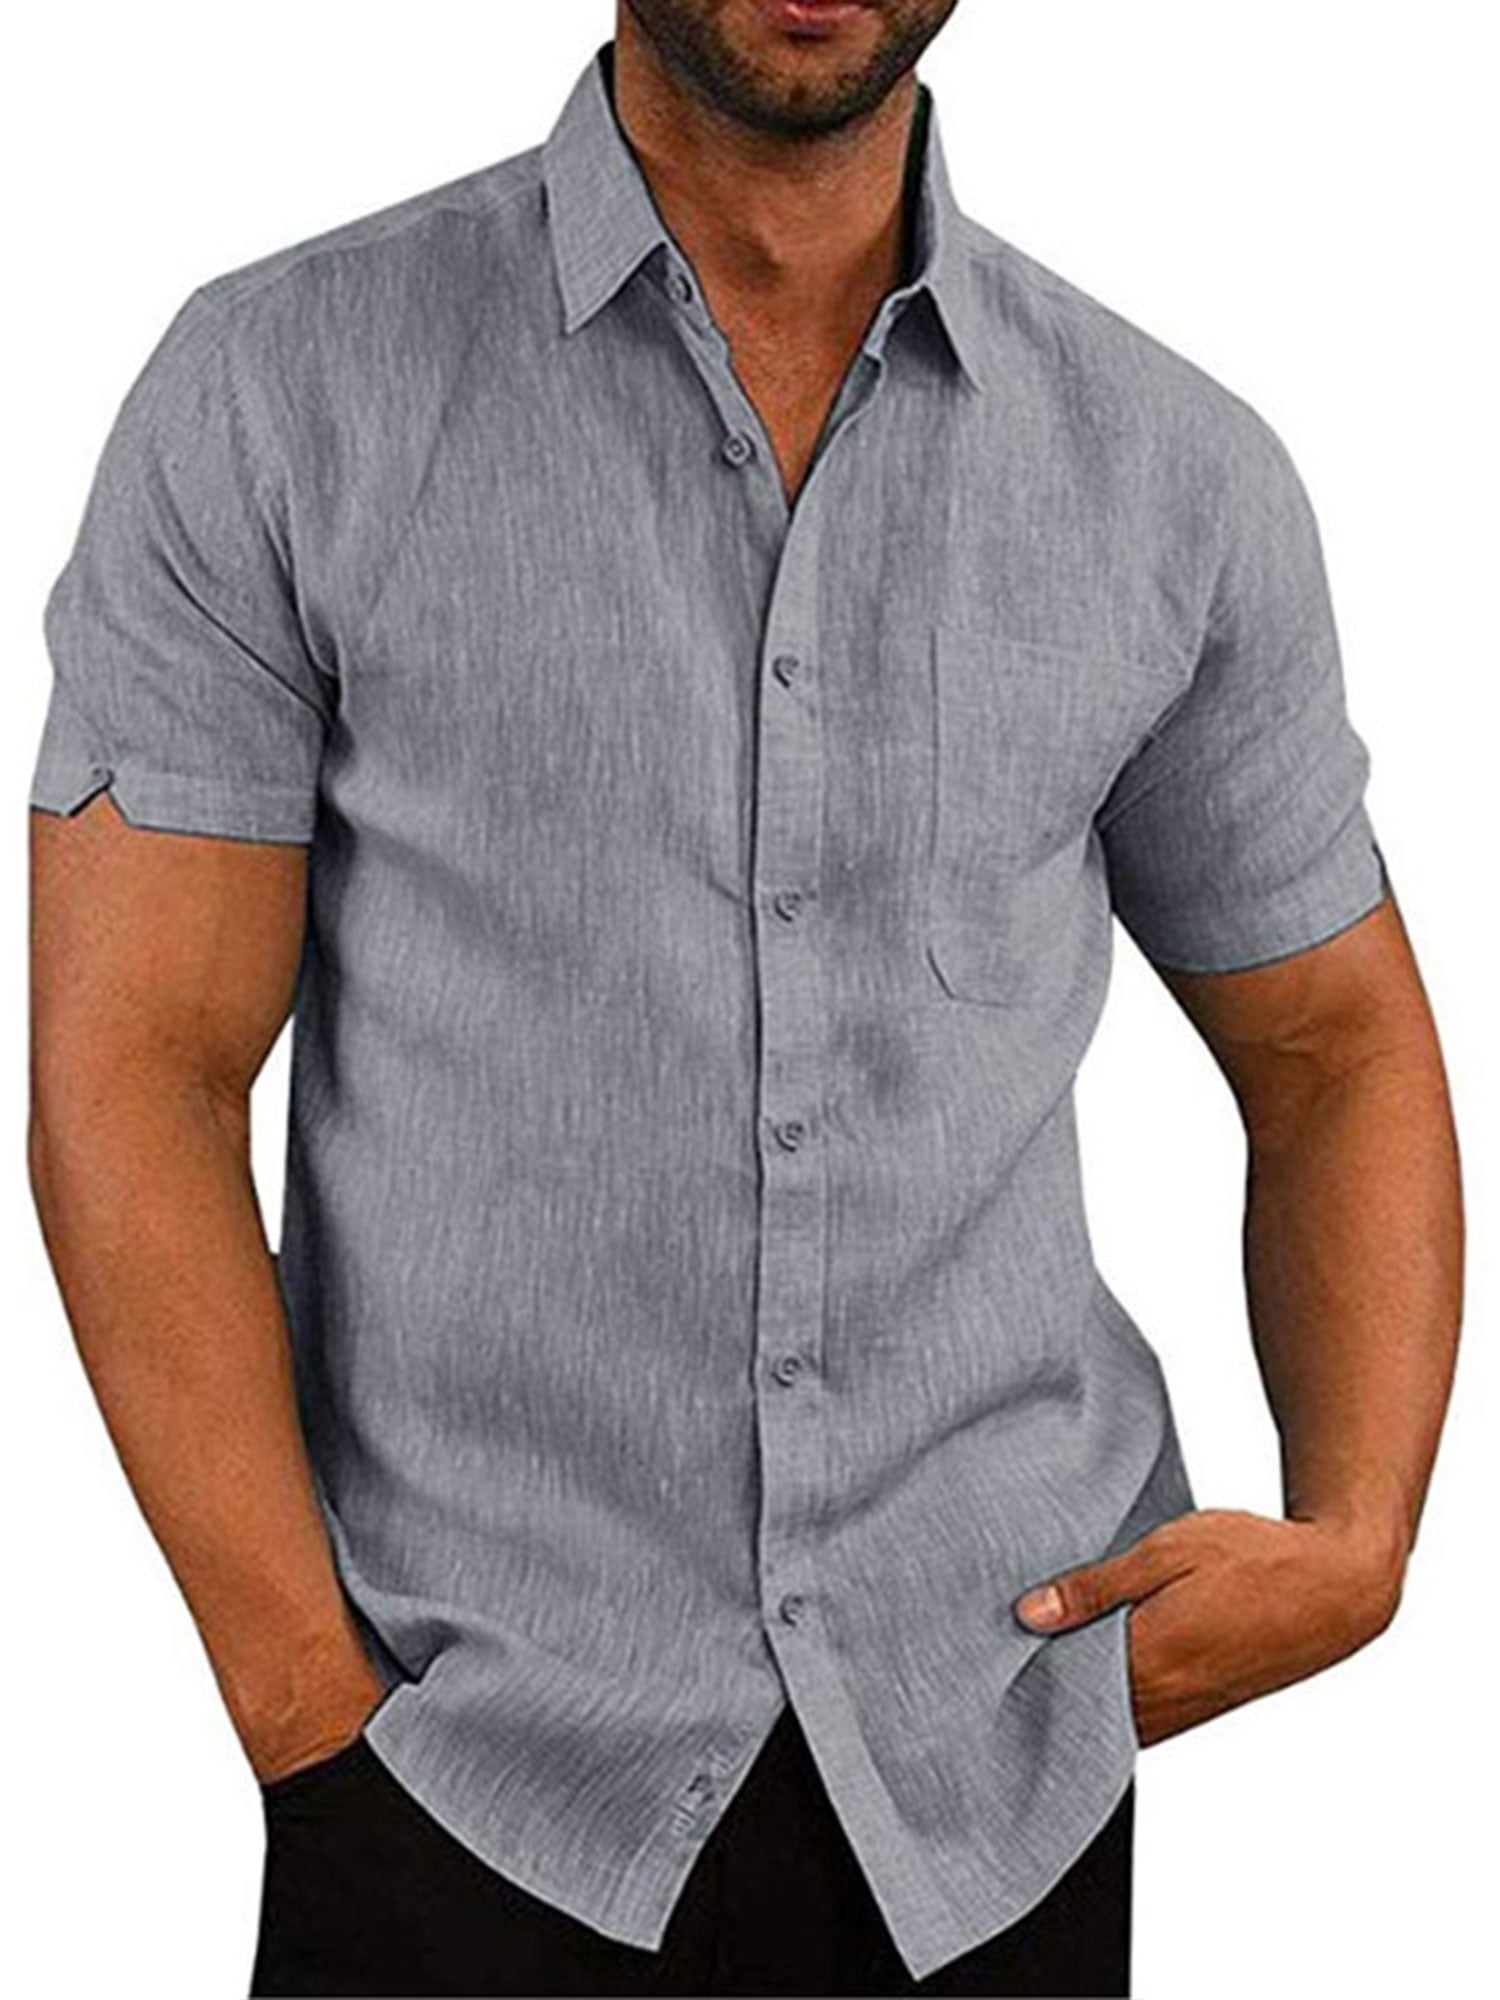 Mens Stylish Button Down Shirt Solid Short Sleeve Work Tops Blouse by Balakie